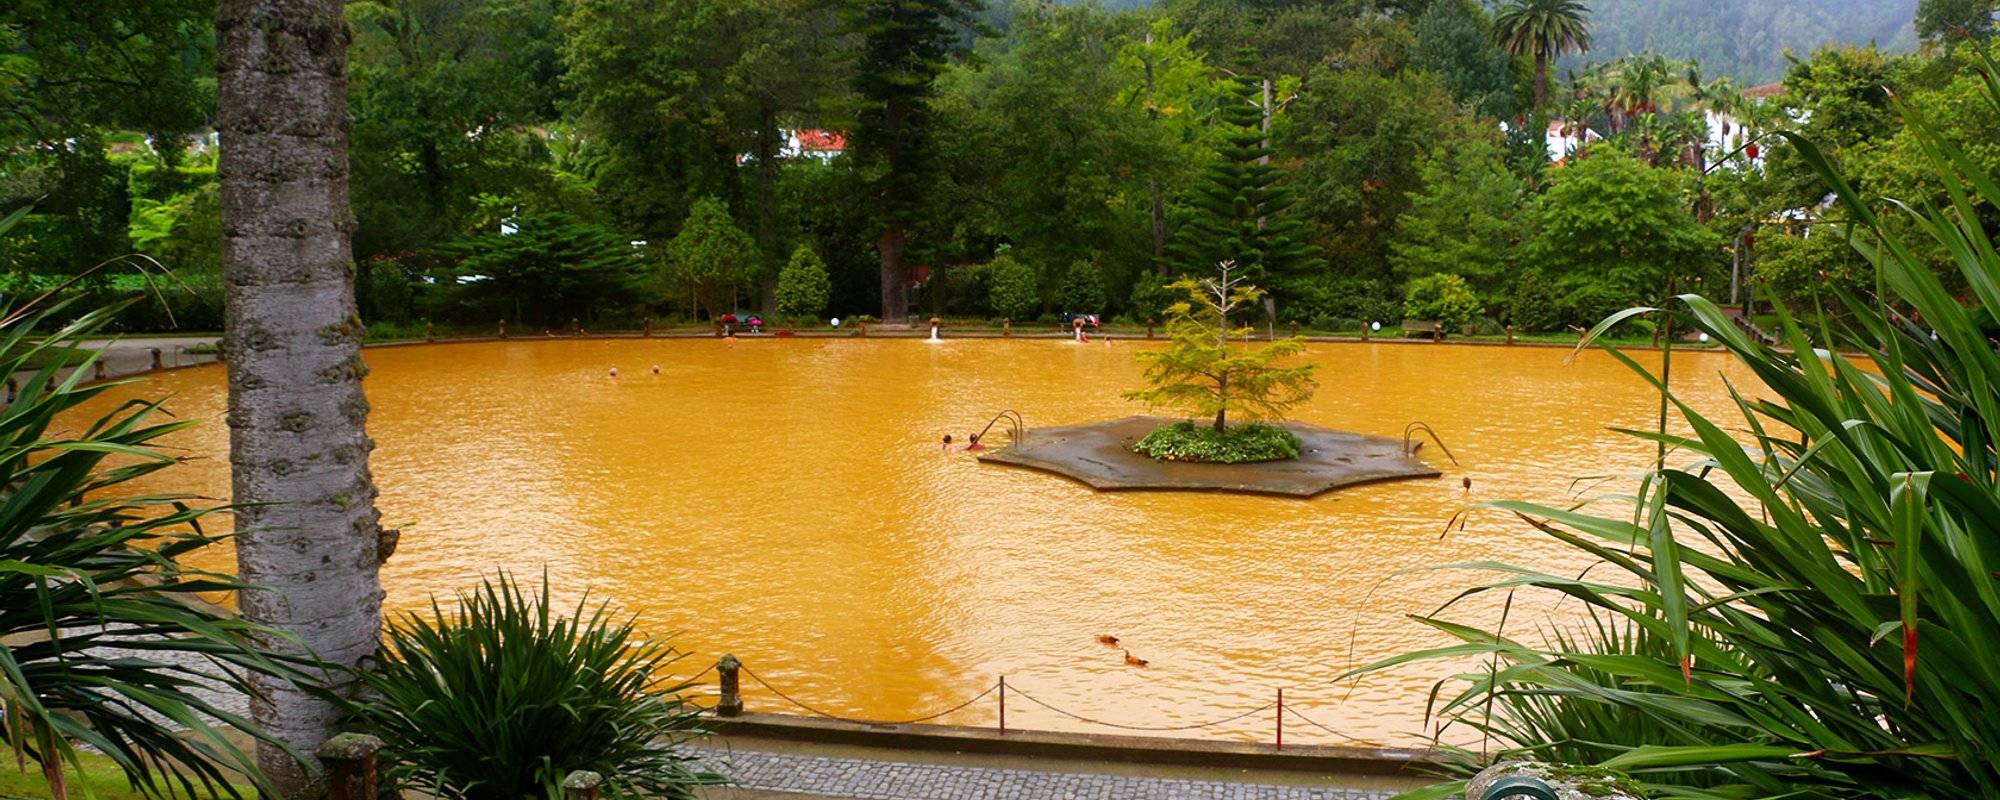 Visit the Azores #15: Bathing in a dirty pond? – oh yes, with pleasure! (EN/GER/FR)